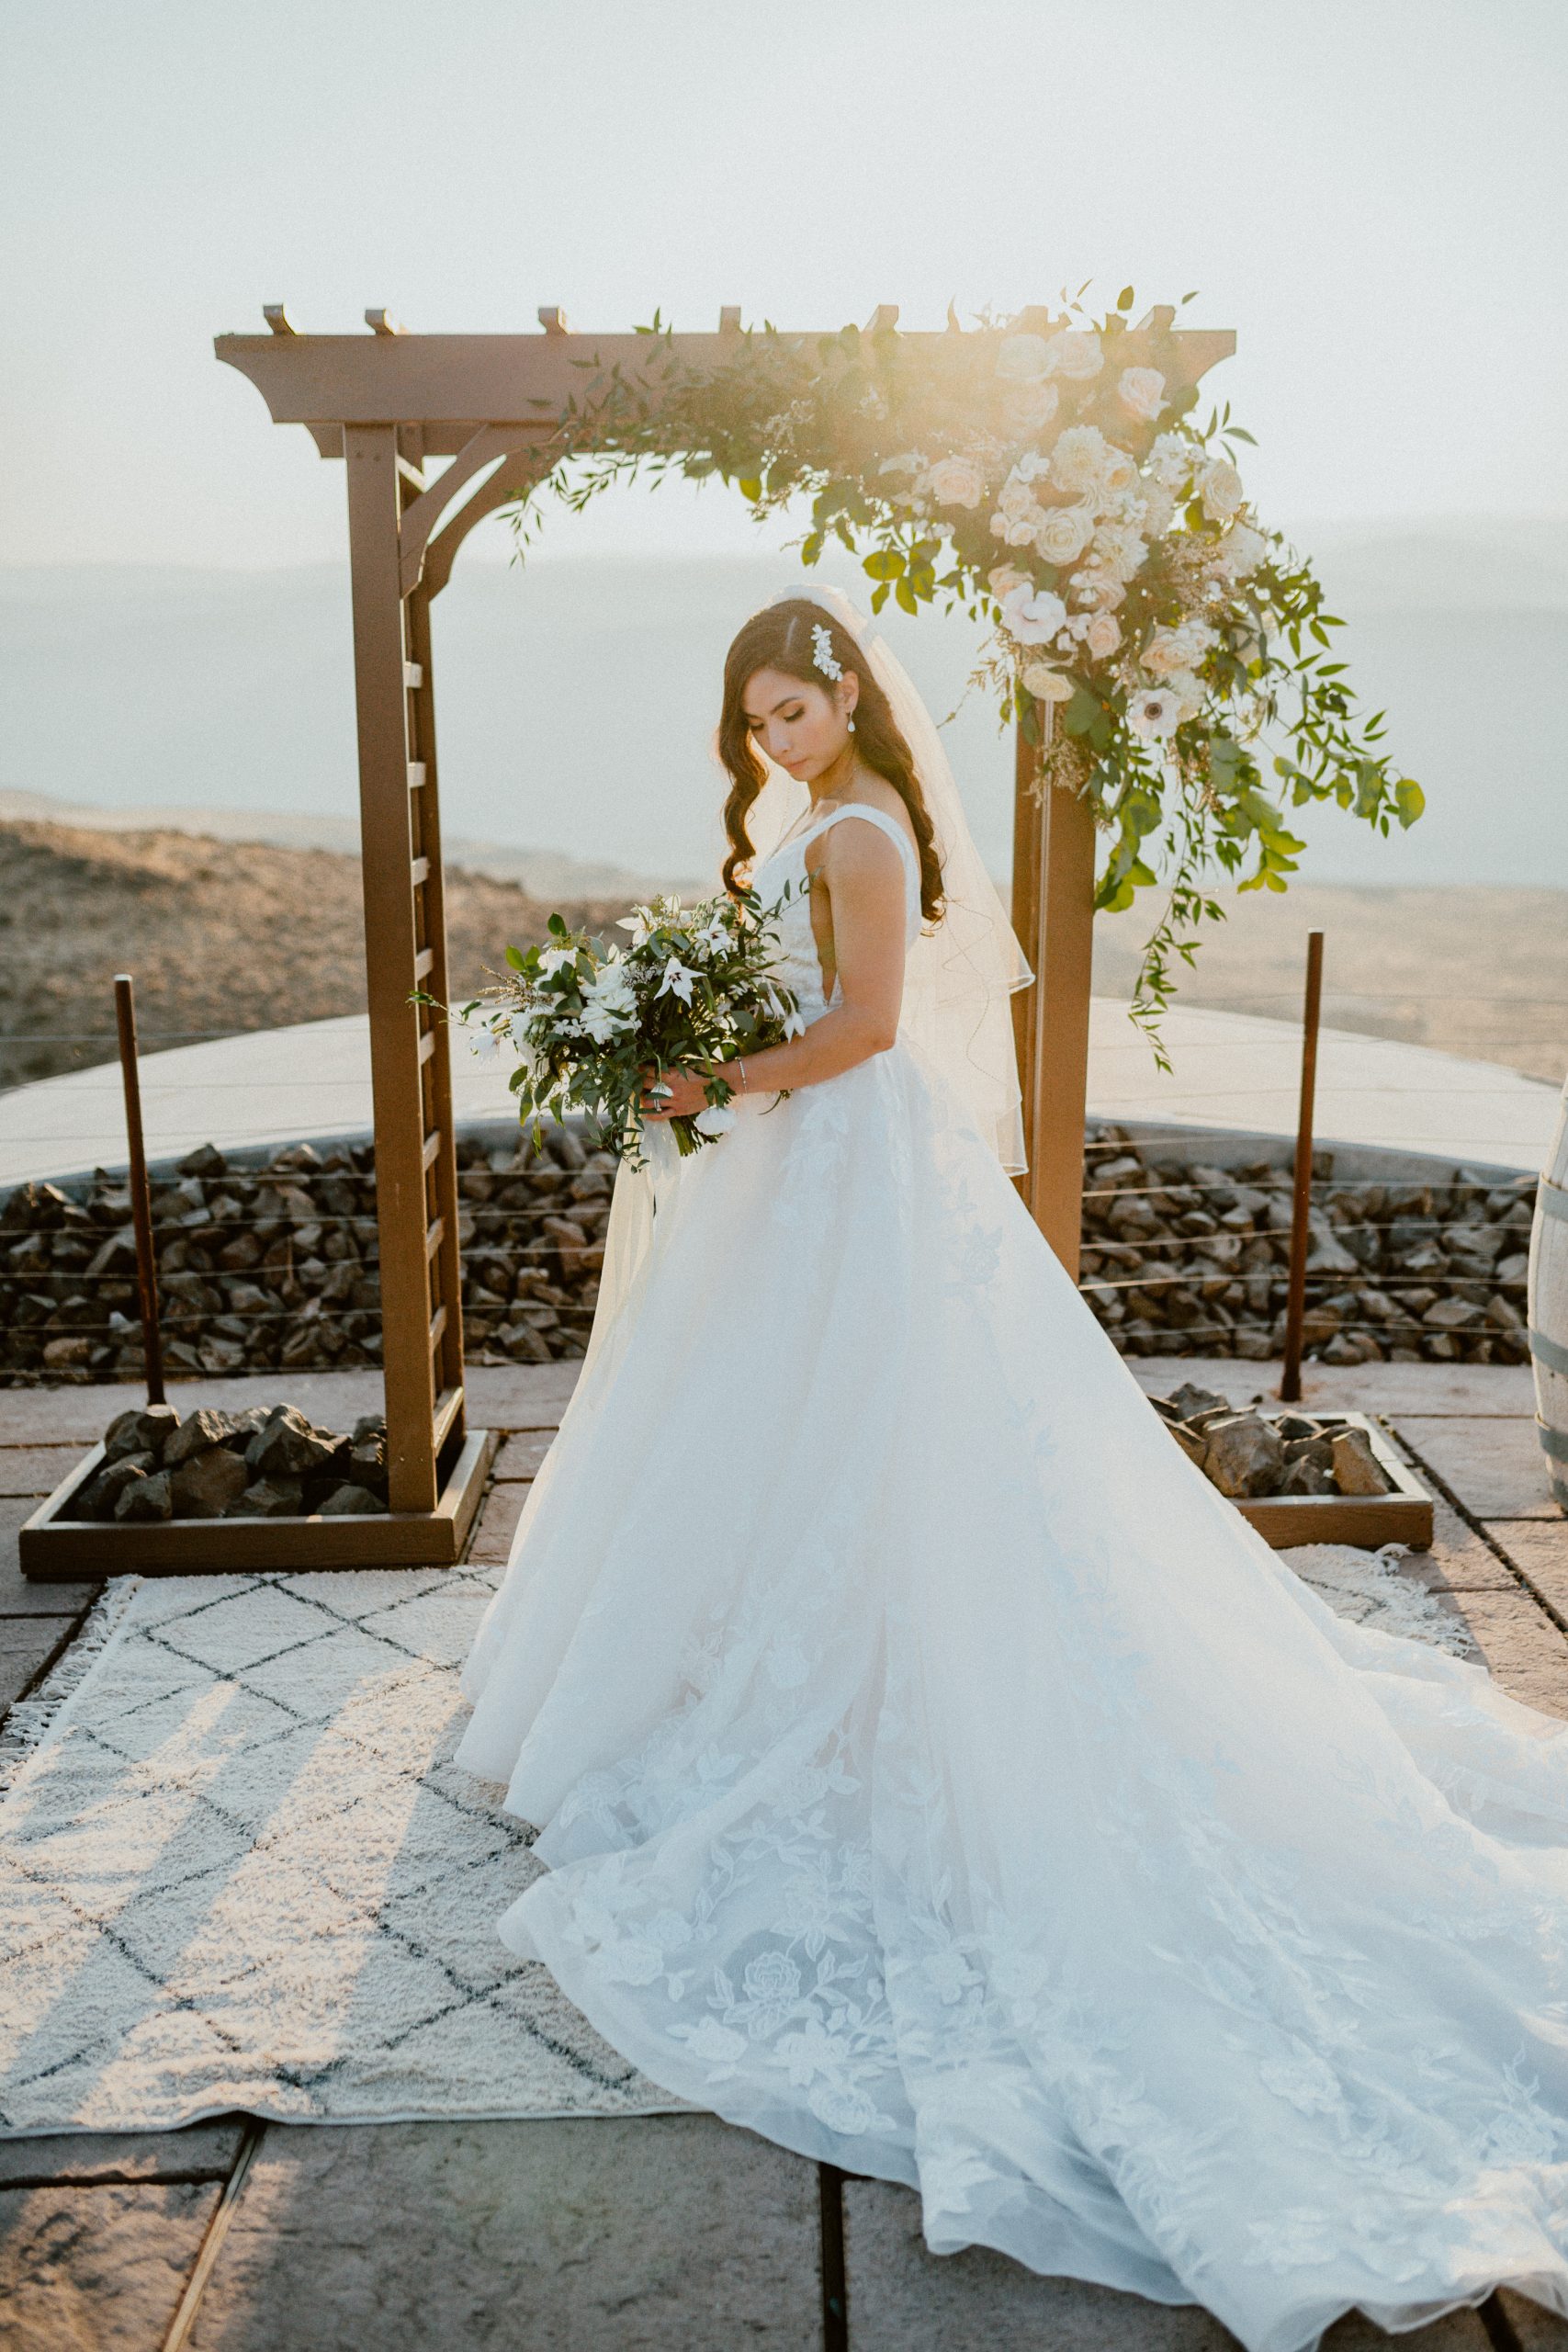 Wedding day style for bride, wears white floral lace with long train and veil bridal style holding white floral wedding bouquet | Washington Elopement, Destination Elopement Photographer, Cave B Inn Elopement Inspiration, Washington Elopement ideas, PNW Fall Wedding Inspiration, Fall Outdoor Wedding Ideas,Fall Wedding Inspiration, PNW Outdoor Wedding Ideas | chelseaabril.com